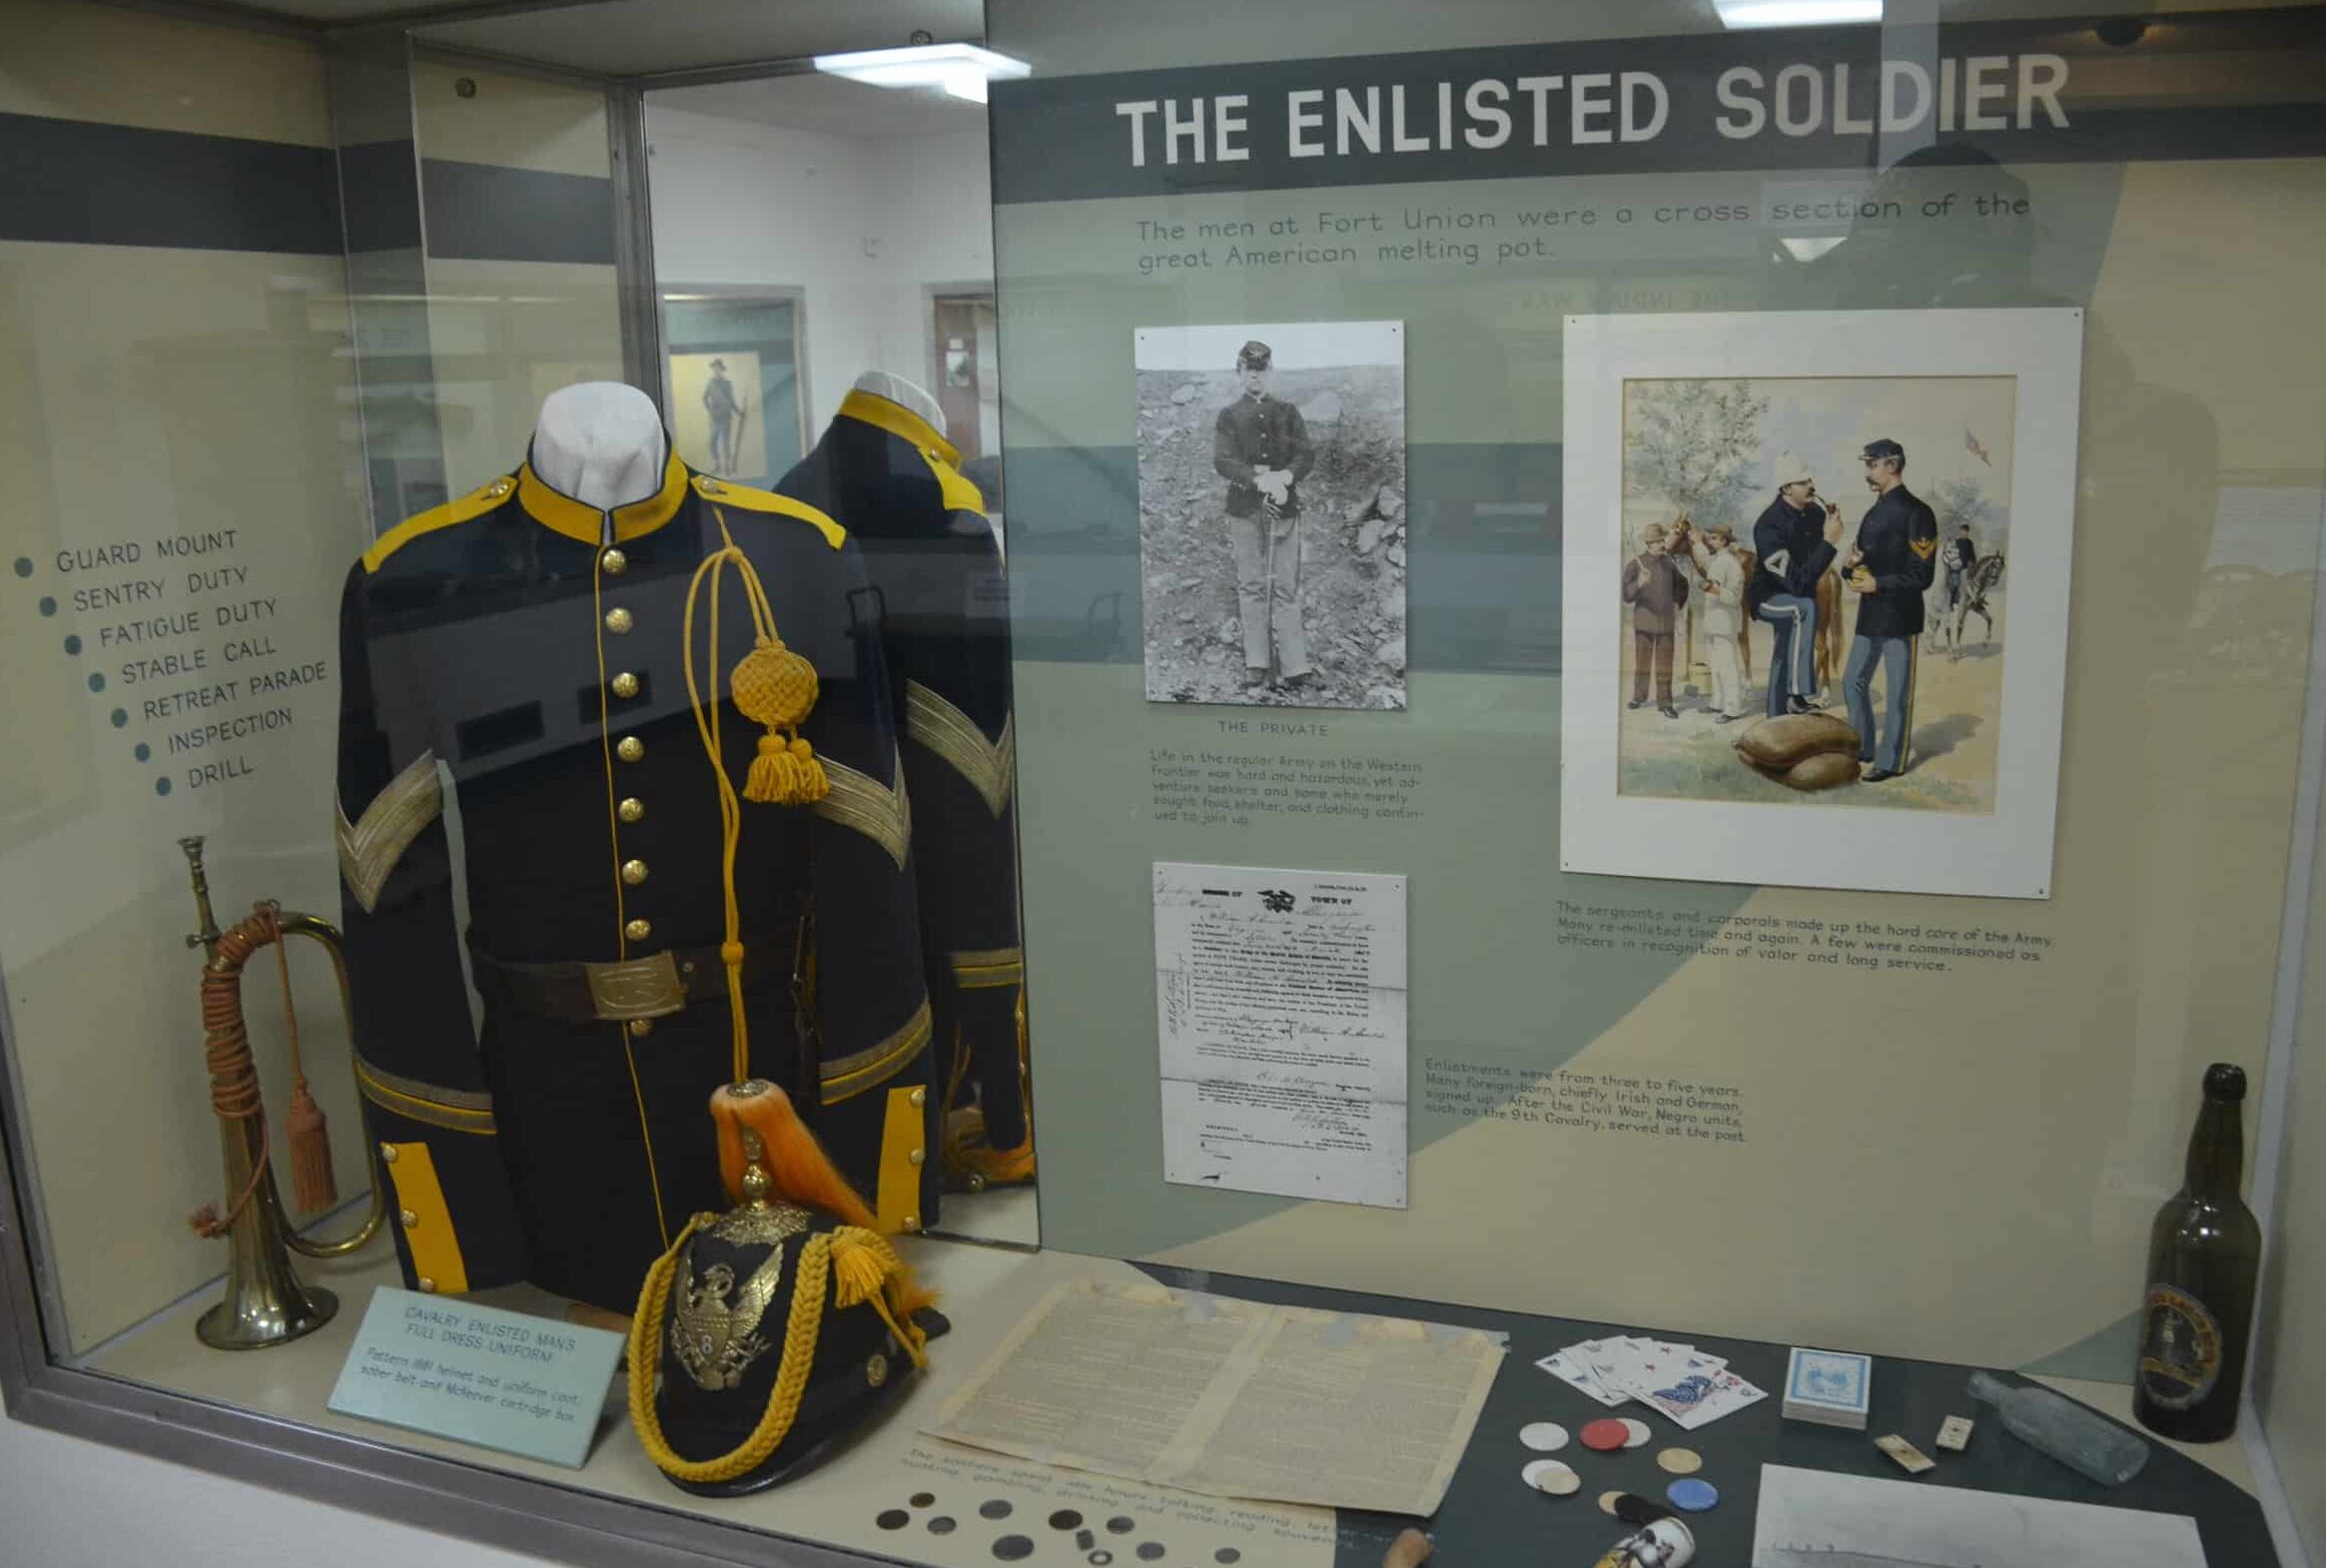 Display about enlisted soldiers